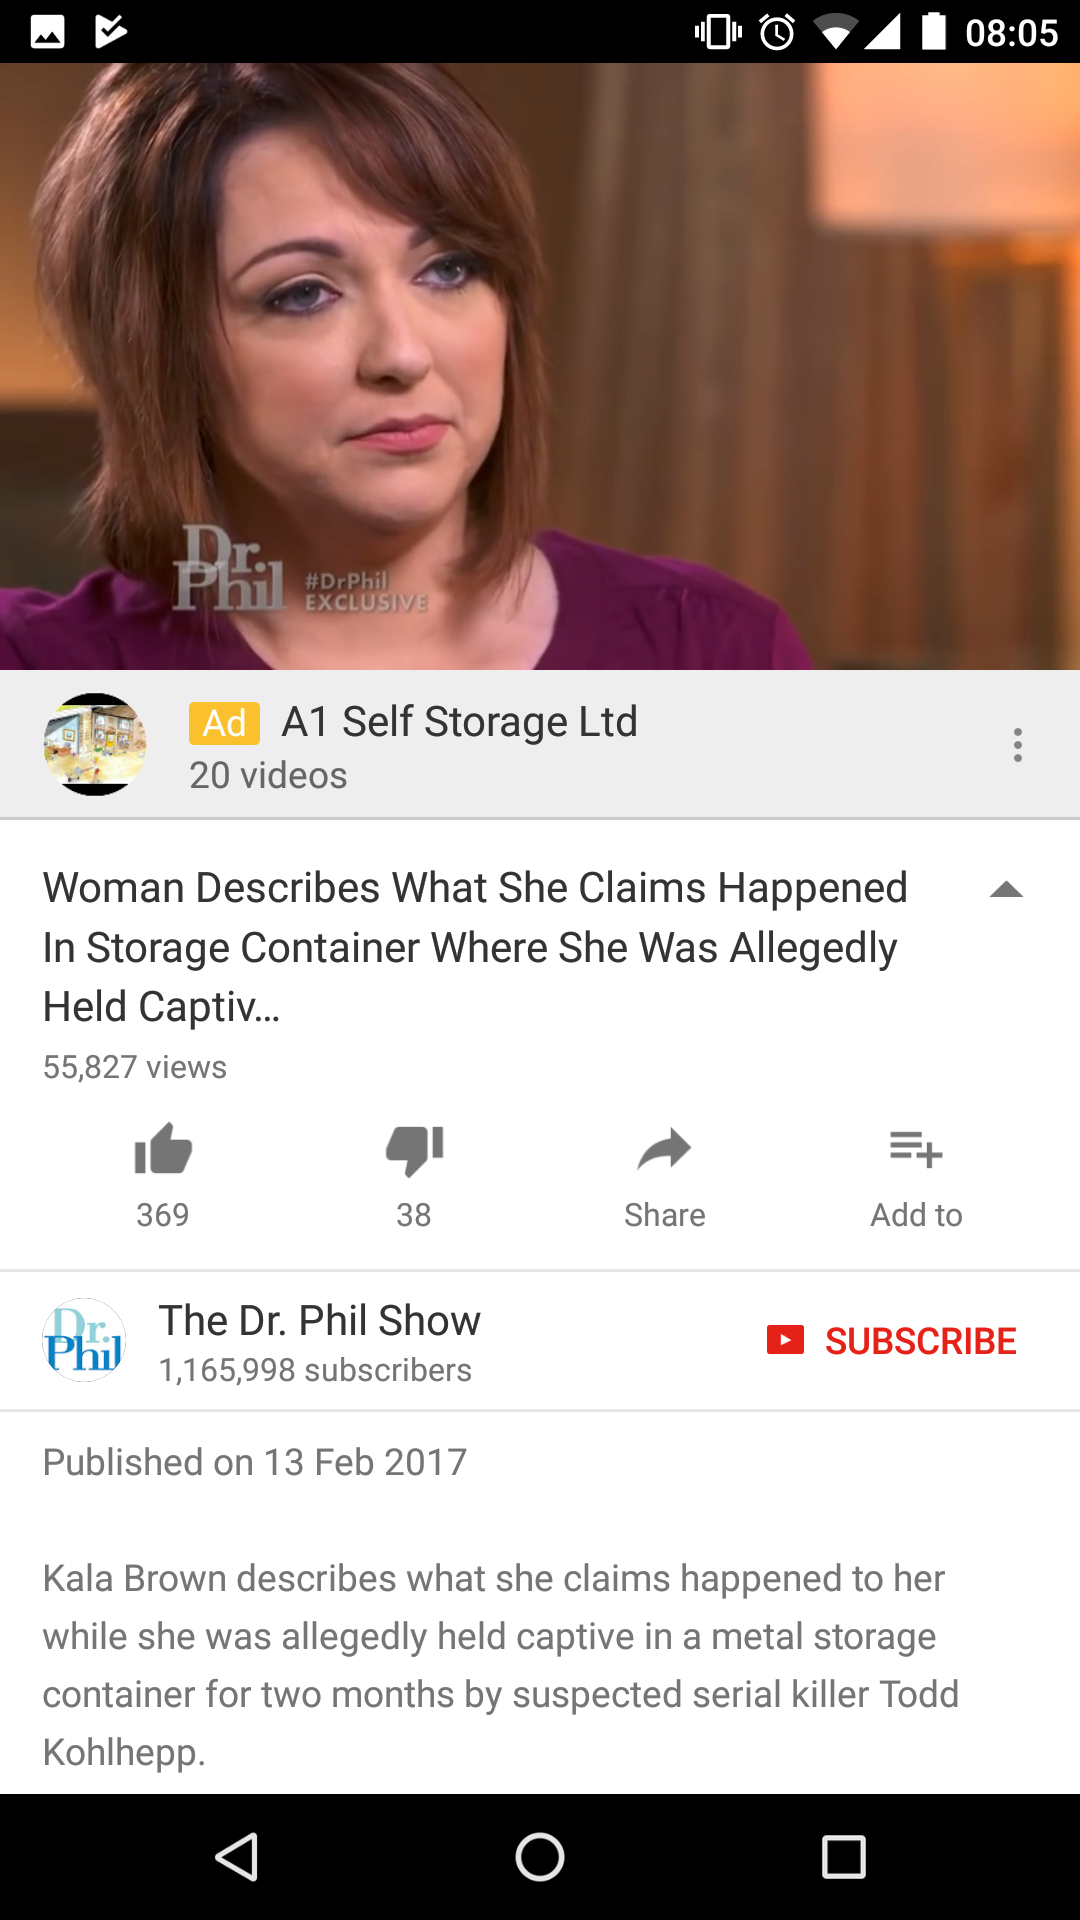 Probably not the most appropriate ad for the video